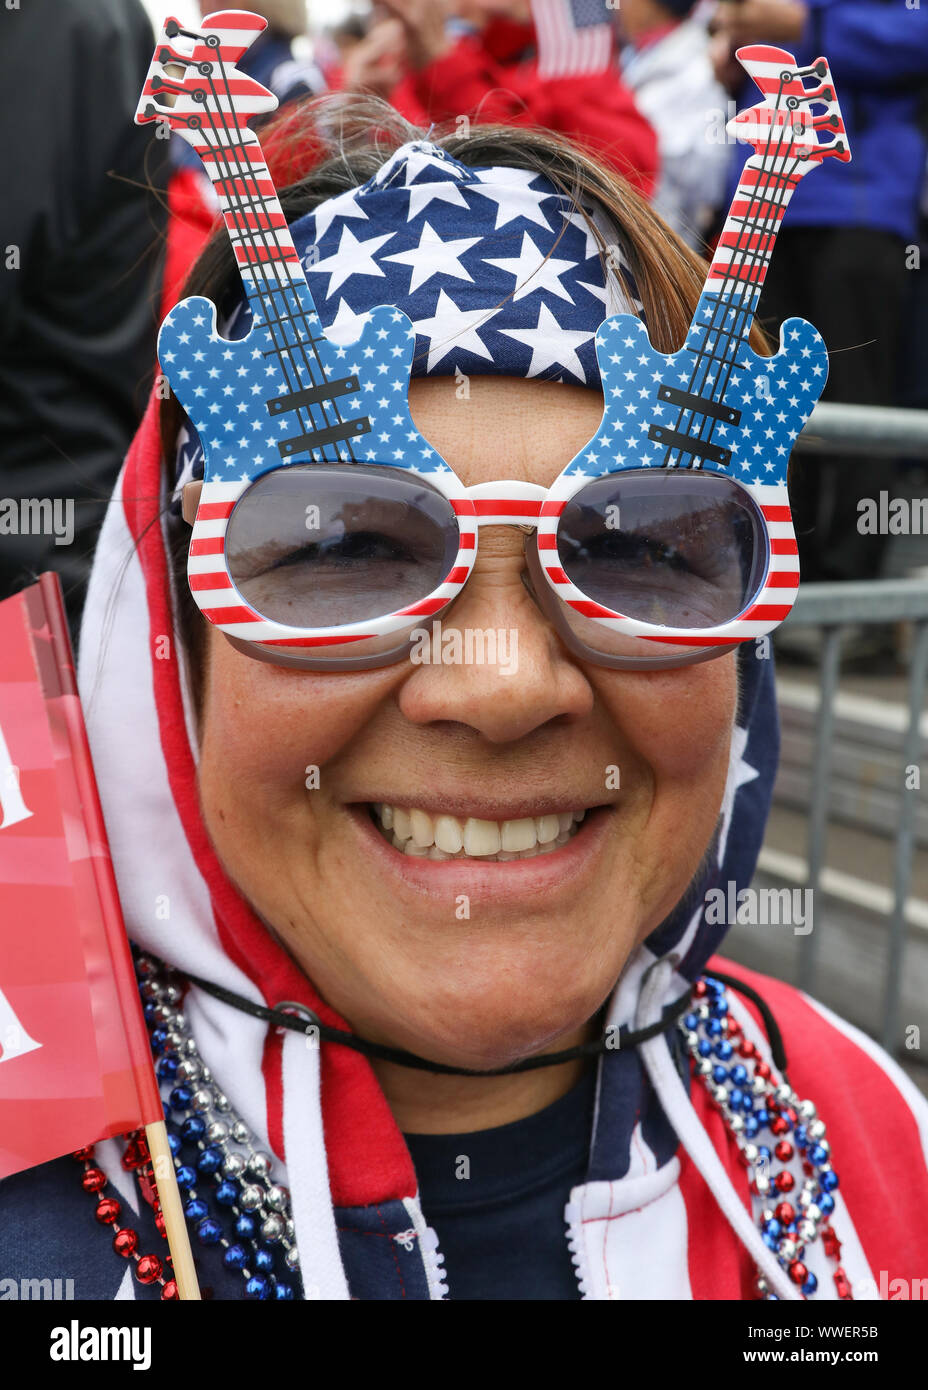 Gleneagles, UK. 15 September 2019. On the final day of the Solheim Cup Ladies Golf tournament between Europe and the United States of America held over the PGA centenary course, Gleneagles, Scotland, many of the supporters came out in fancy costumes and face paint to show support for their respective teams. In the end, Europe won the competition and took the Cup by 14 1/2 points to 13 1/2. Credit: Findlay/ Alamy News Stock Photo